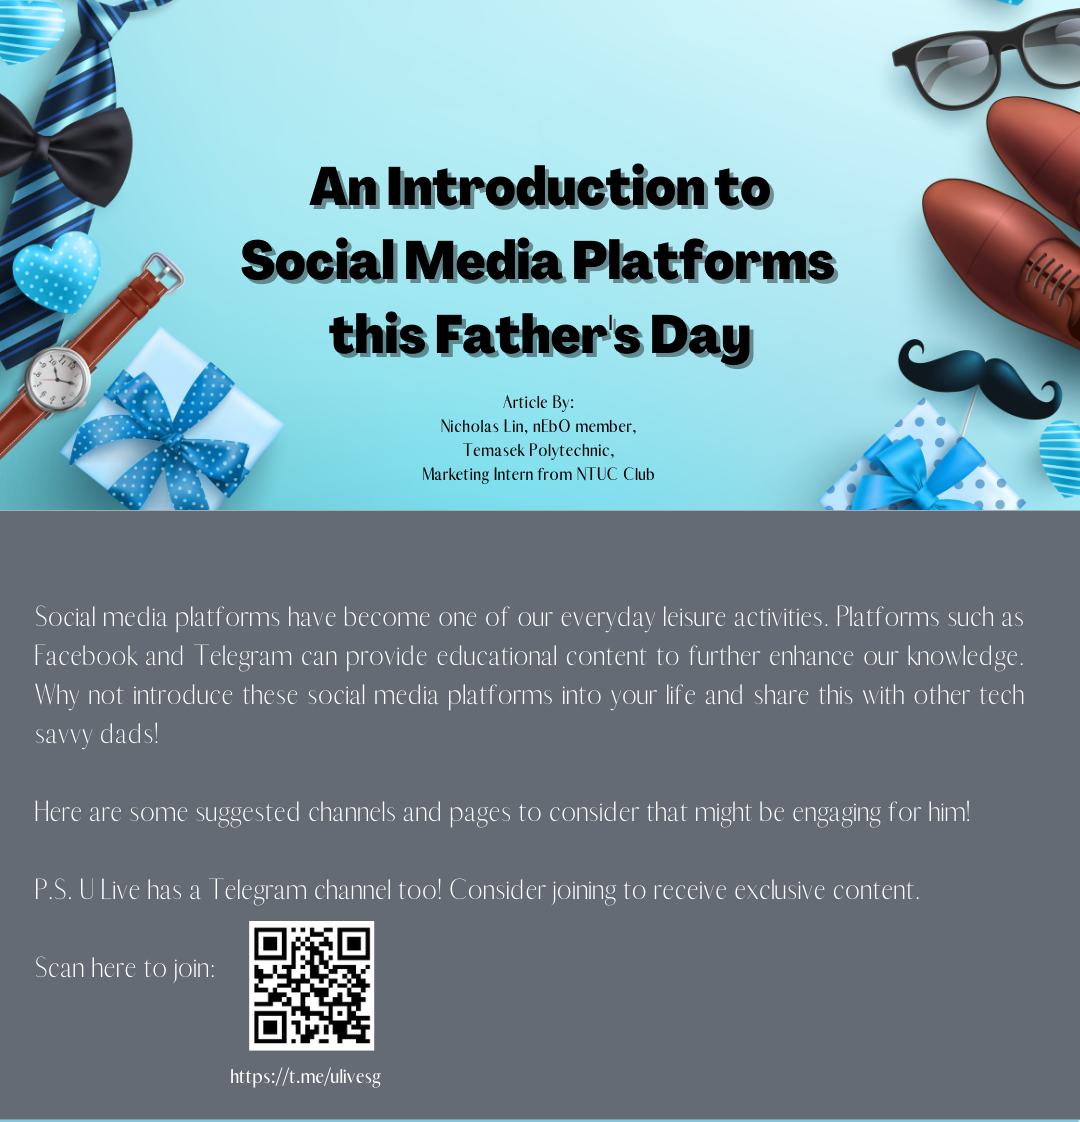 An Introduction to Social Media Platforms this Father's Day